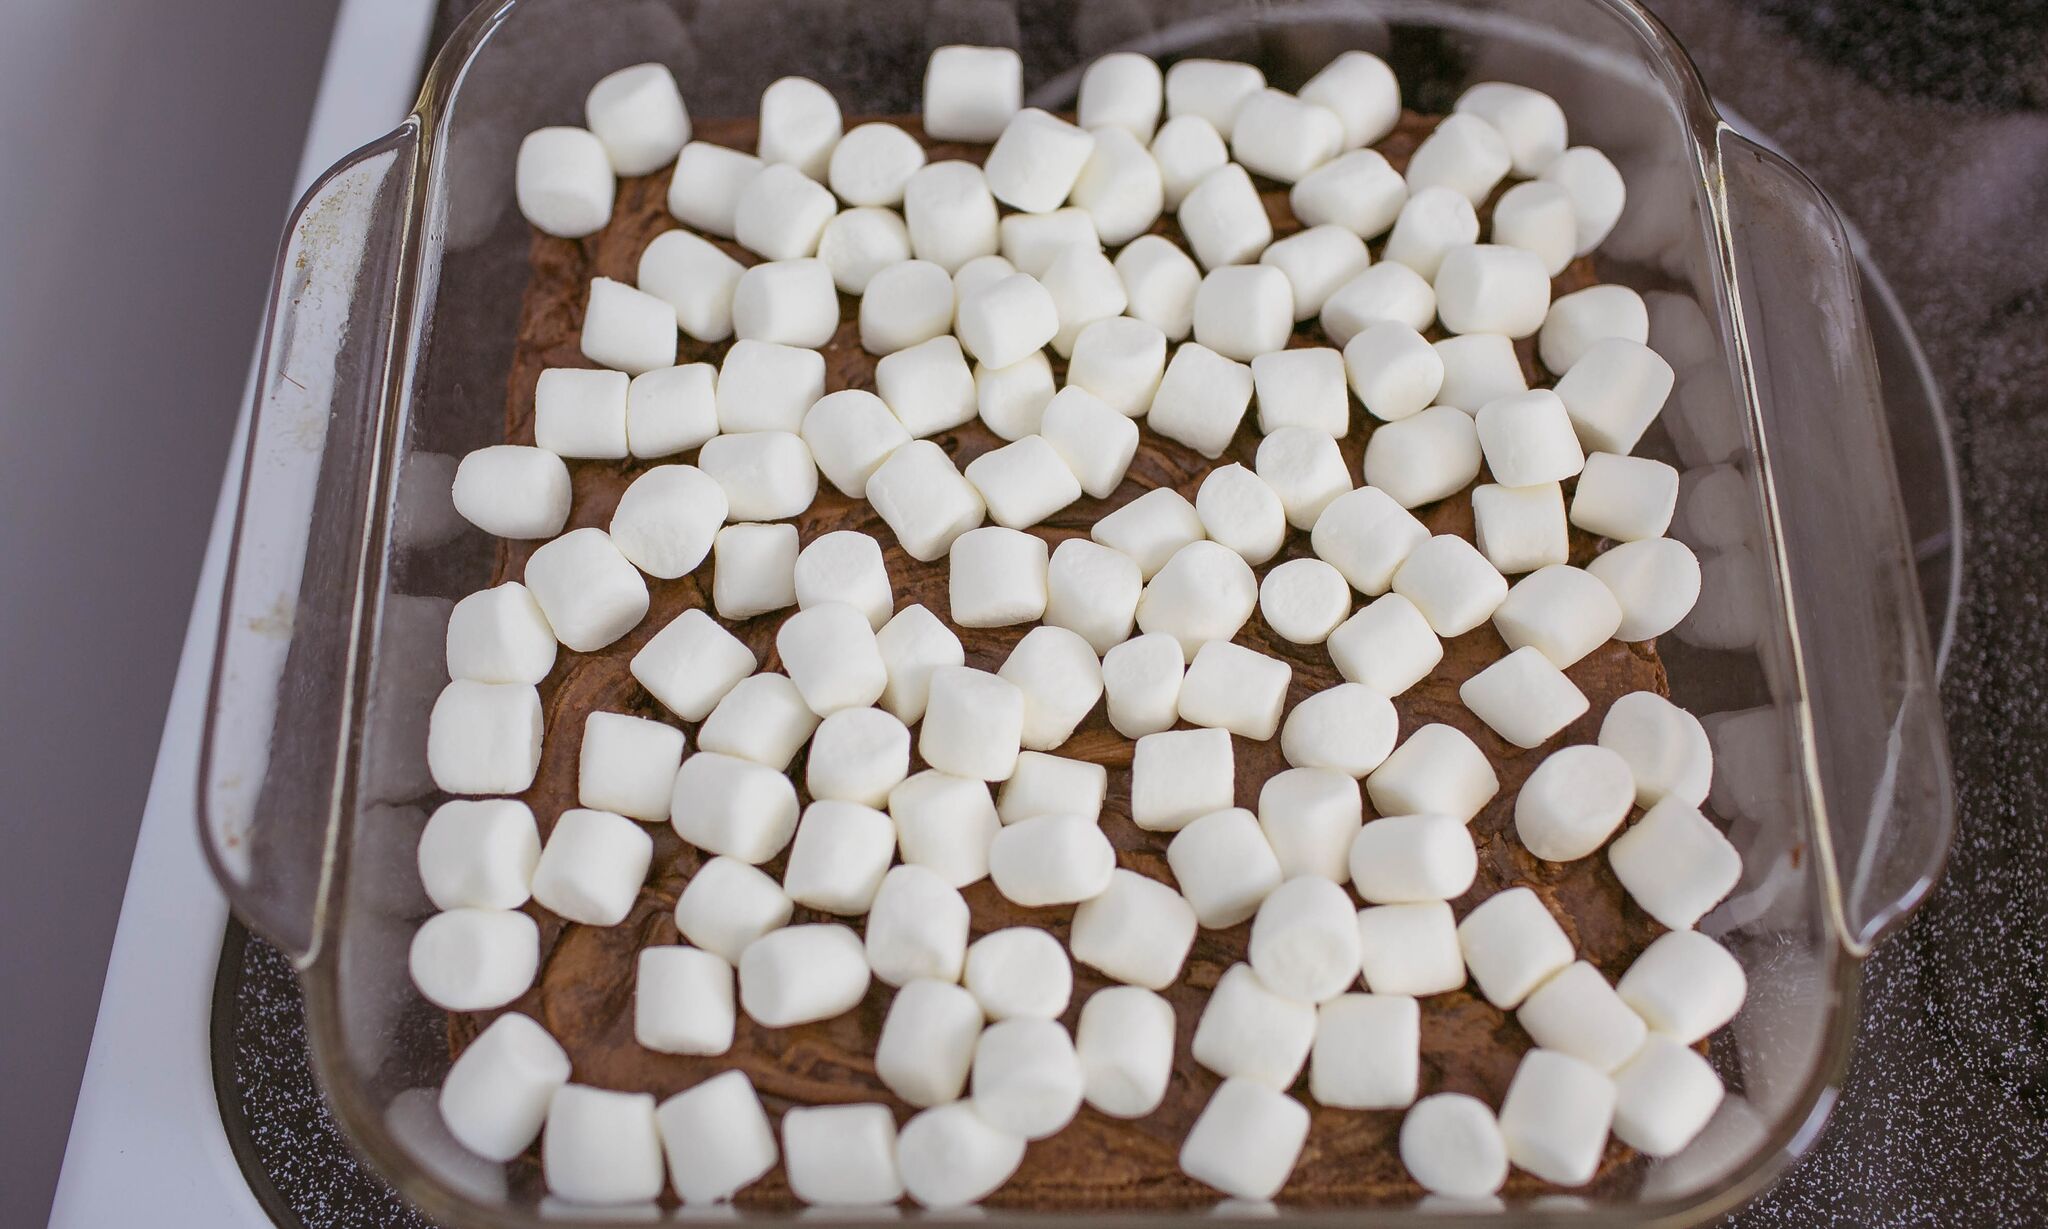 Bake brownies according to package instructions and top with mini marshmallows. 